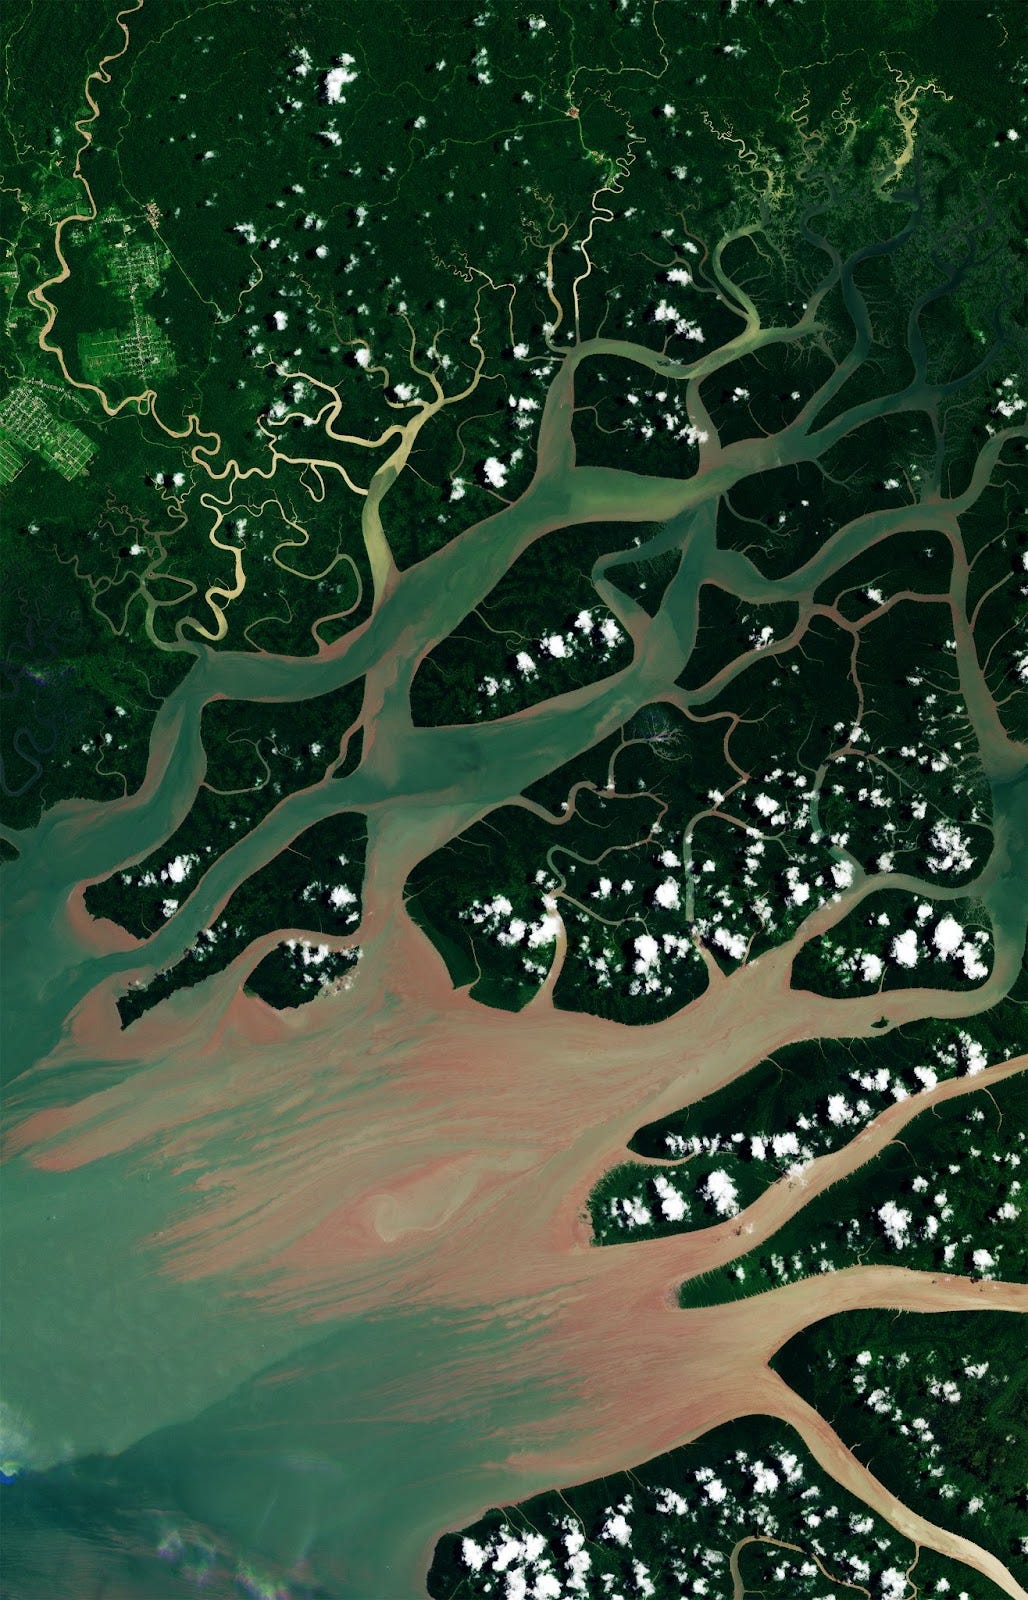 West Papua, Indonesia from the air: Mangrove forests are a natural fortification against storm surges (© Planet Labs PBC, CC BY-NC-SA 2.0 via Medium).